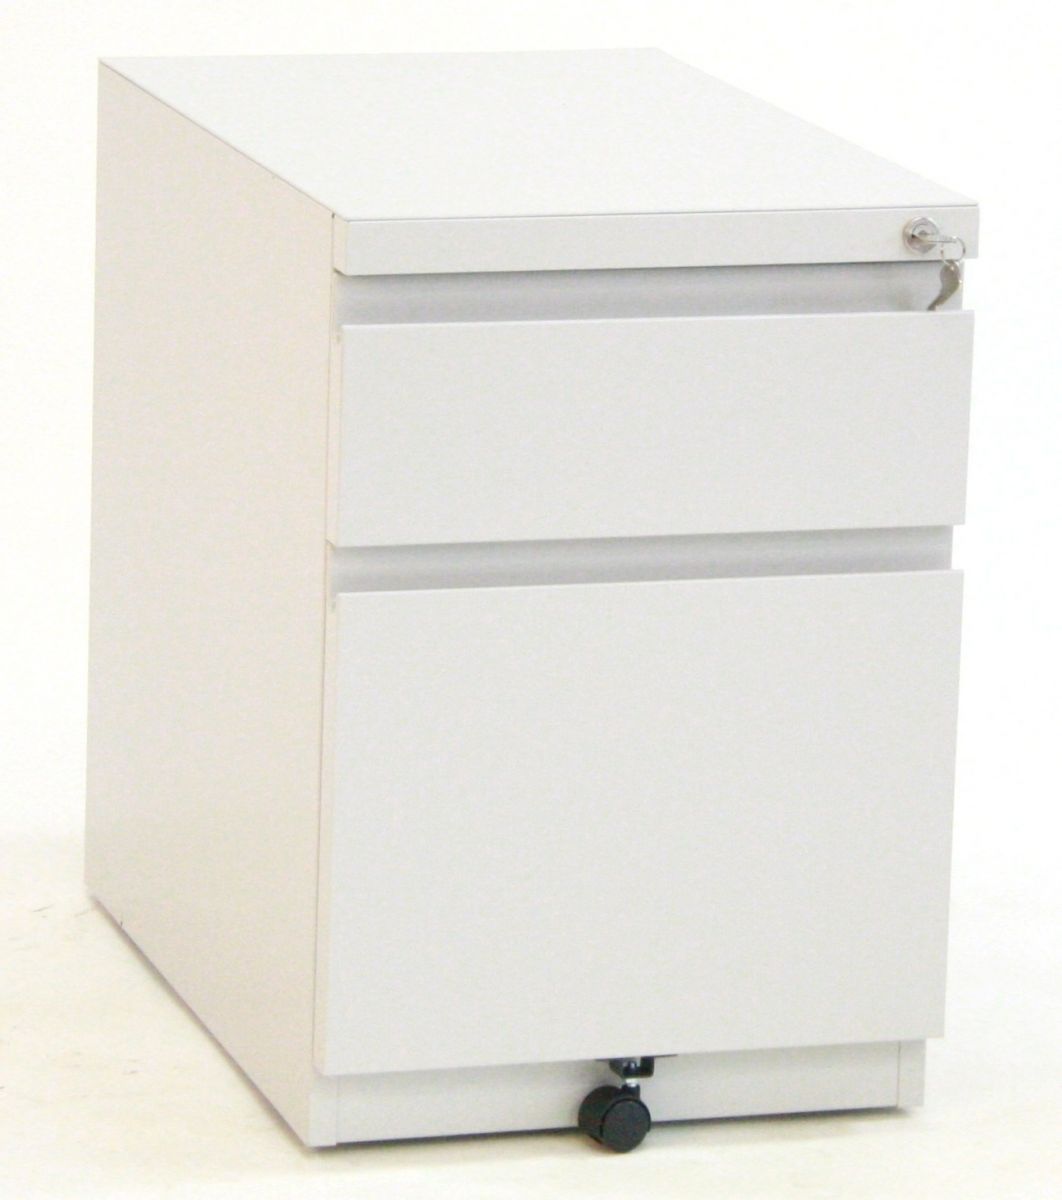 NP1443 - New 23 1/2" Mobile Pedestals with Tops